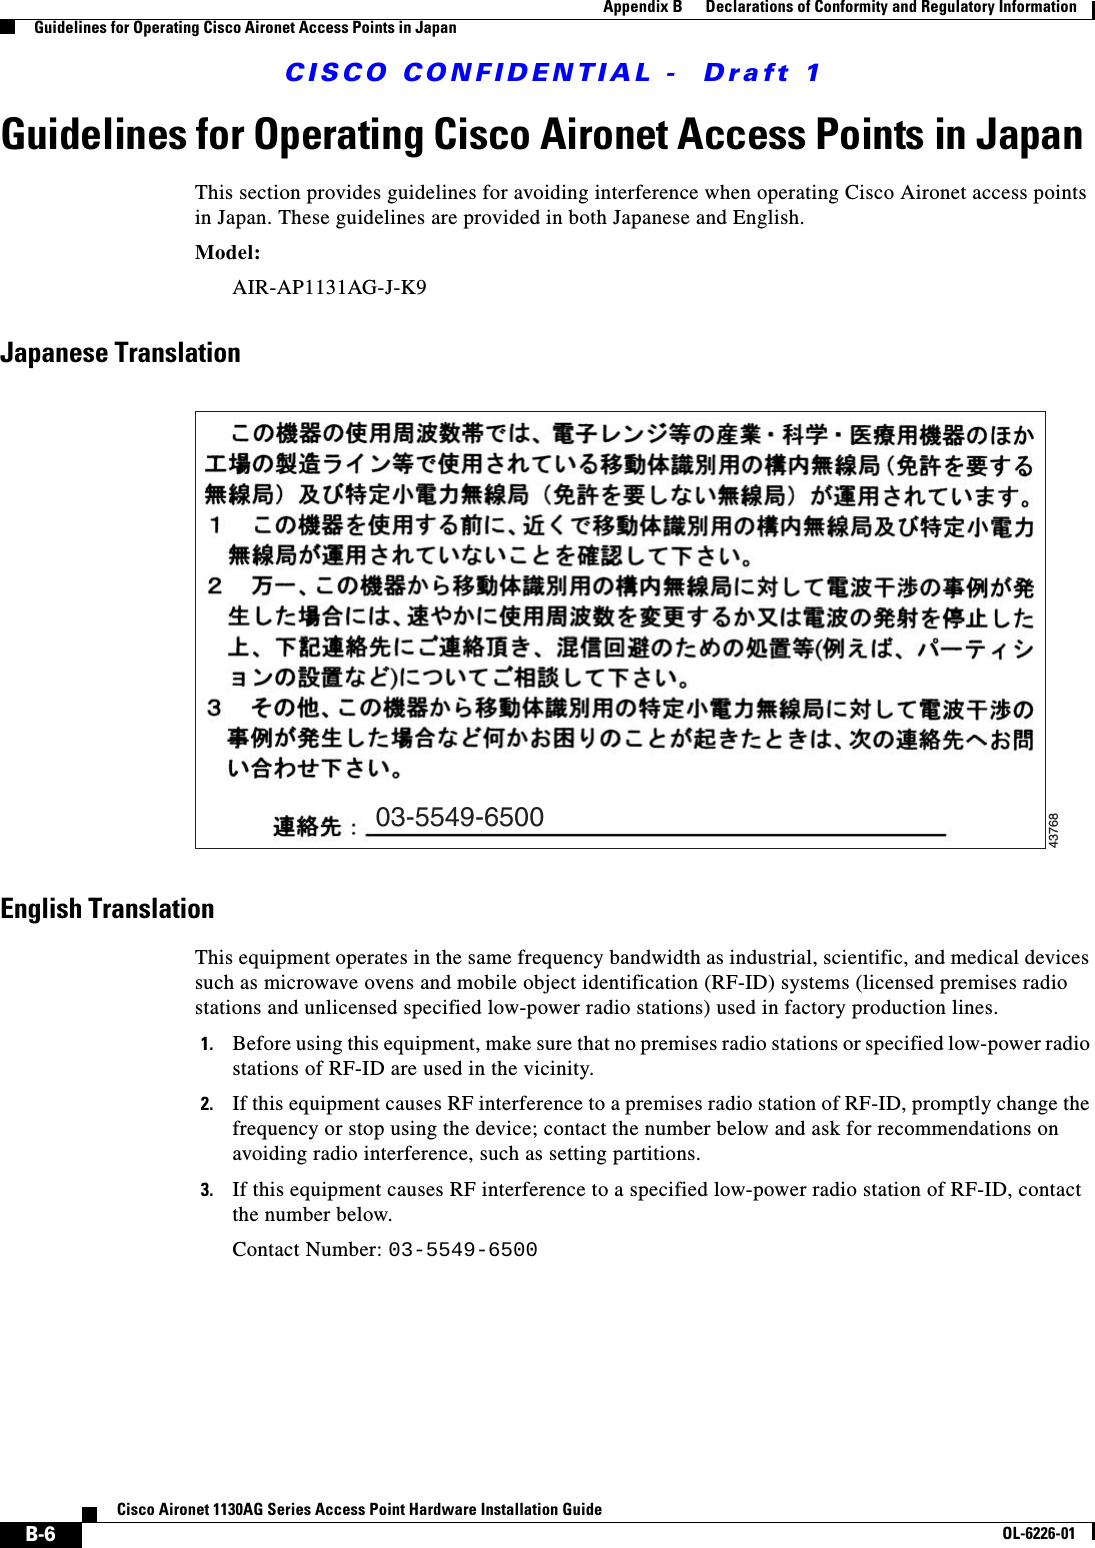  CISCO CONFIDENTIAL -  Draft 1B-6Cisco Aironet 1130AG Series Access Point Hardware Installation GuideOL-6226-01Appendix B      Declarations of Conformity and Regulatory InformationGuidelines for Operating Cisco Aironet Access Points in JapanGuidelines for Operating Cisco Aironet Access Points in JapanThis section provides guidelines for avoiding interference when operating Cisco Aironet access points in Japan. These guidelines are provided in both Japanese and English.Model:AIR-AP1131AG-J-K9 Japanese TranslationEnglish TranslationThis equipment operates in the same frequency bandwidth as industrial, scientific, and medical devices such as microwave ovens and mobile object identification (RF-ID) systems (licensed premises radio stations and unlicensed specified low-power radio stations) used in factory production lines.1. Before using this equipment, make sure that no premises radio stations or specified low-power radio stations of RF-ID are used in the vicinity.2. If this equipment causes RF interference to a premises radio station of RF-ID, promptly change the frequency or stop using the device; contact the number below and ask for recommendations on avoiding radio interference, such as setting partitions.3. If this equipment causes RF interference to a specified low-power radio station of RF-ID, contact the number below.Contact Number: 03-5549-650003-5549-650043768